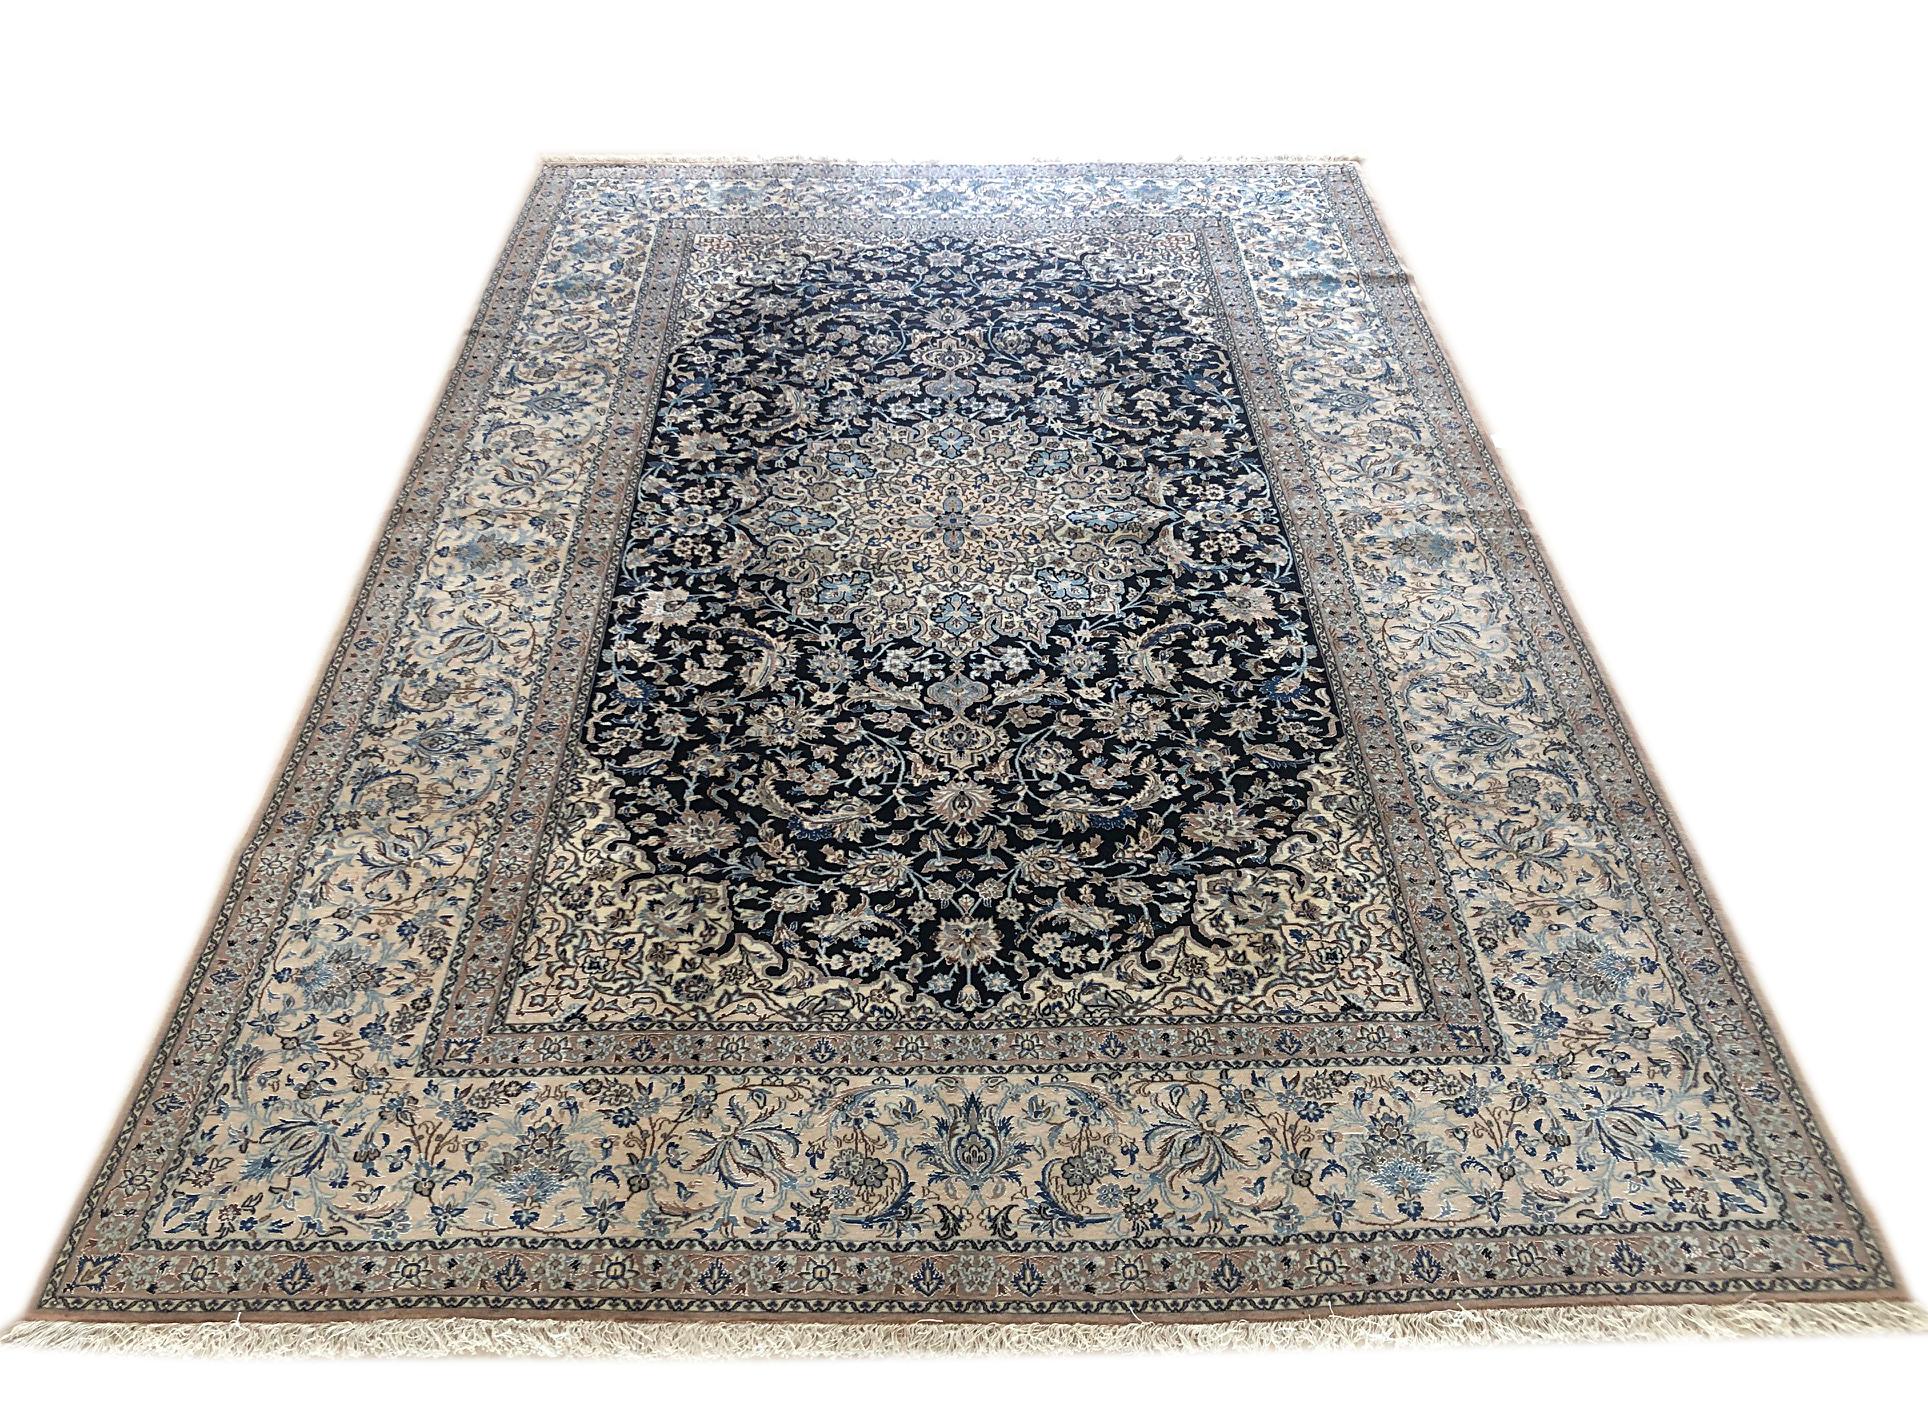 This authentic Persian hand-made Nain (9 LA) rug has wool and silk pile with cotton foundation. Nain is a city in Iran that is well known for producing fine handmade rug. Nain rugs have a high reputation and are very popular. This beautiful rug has